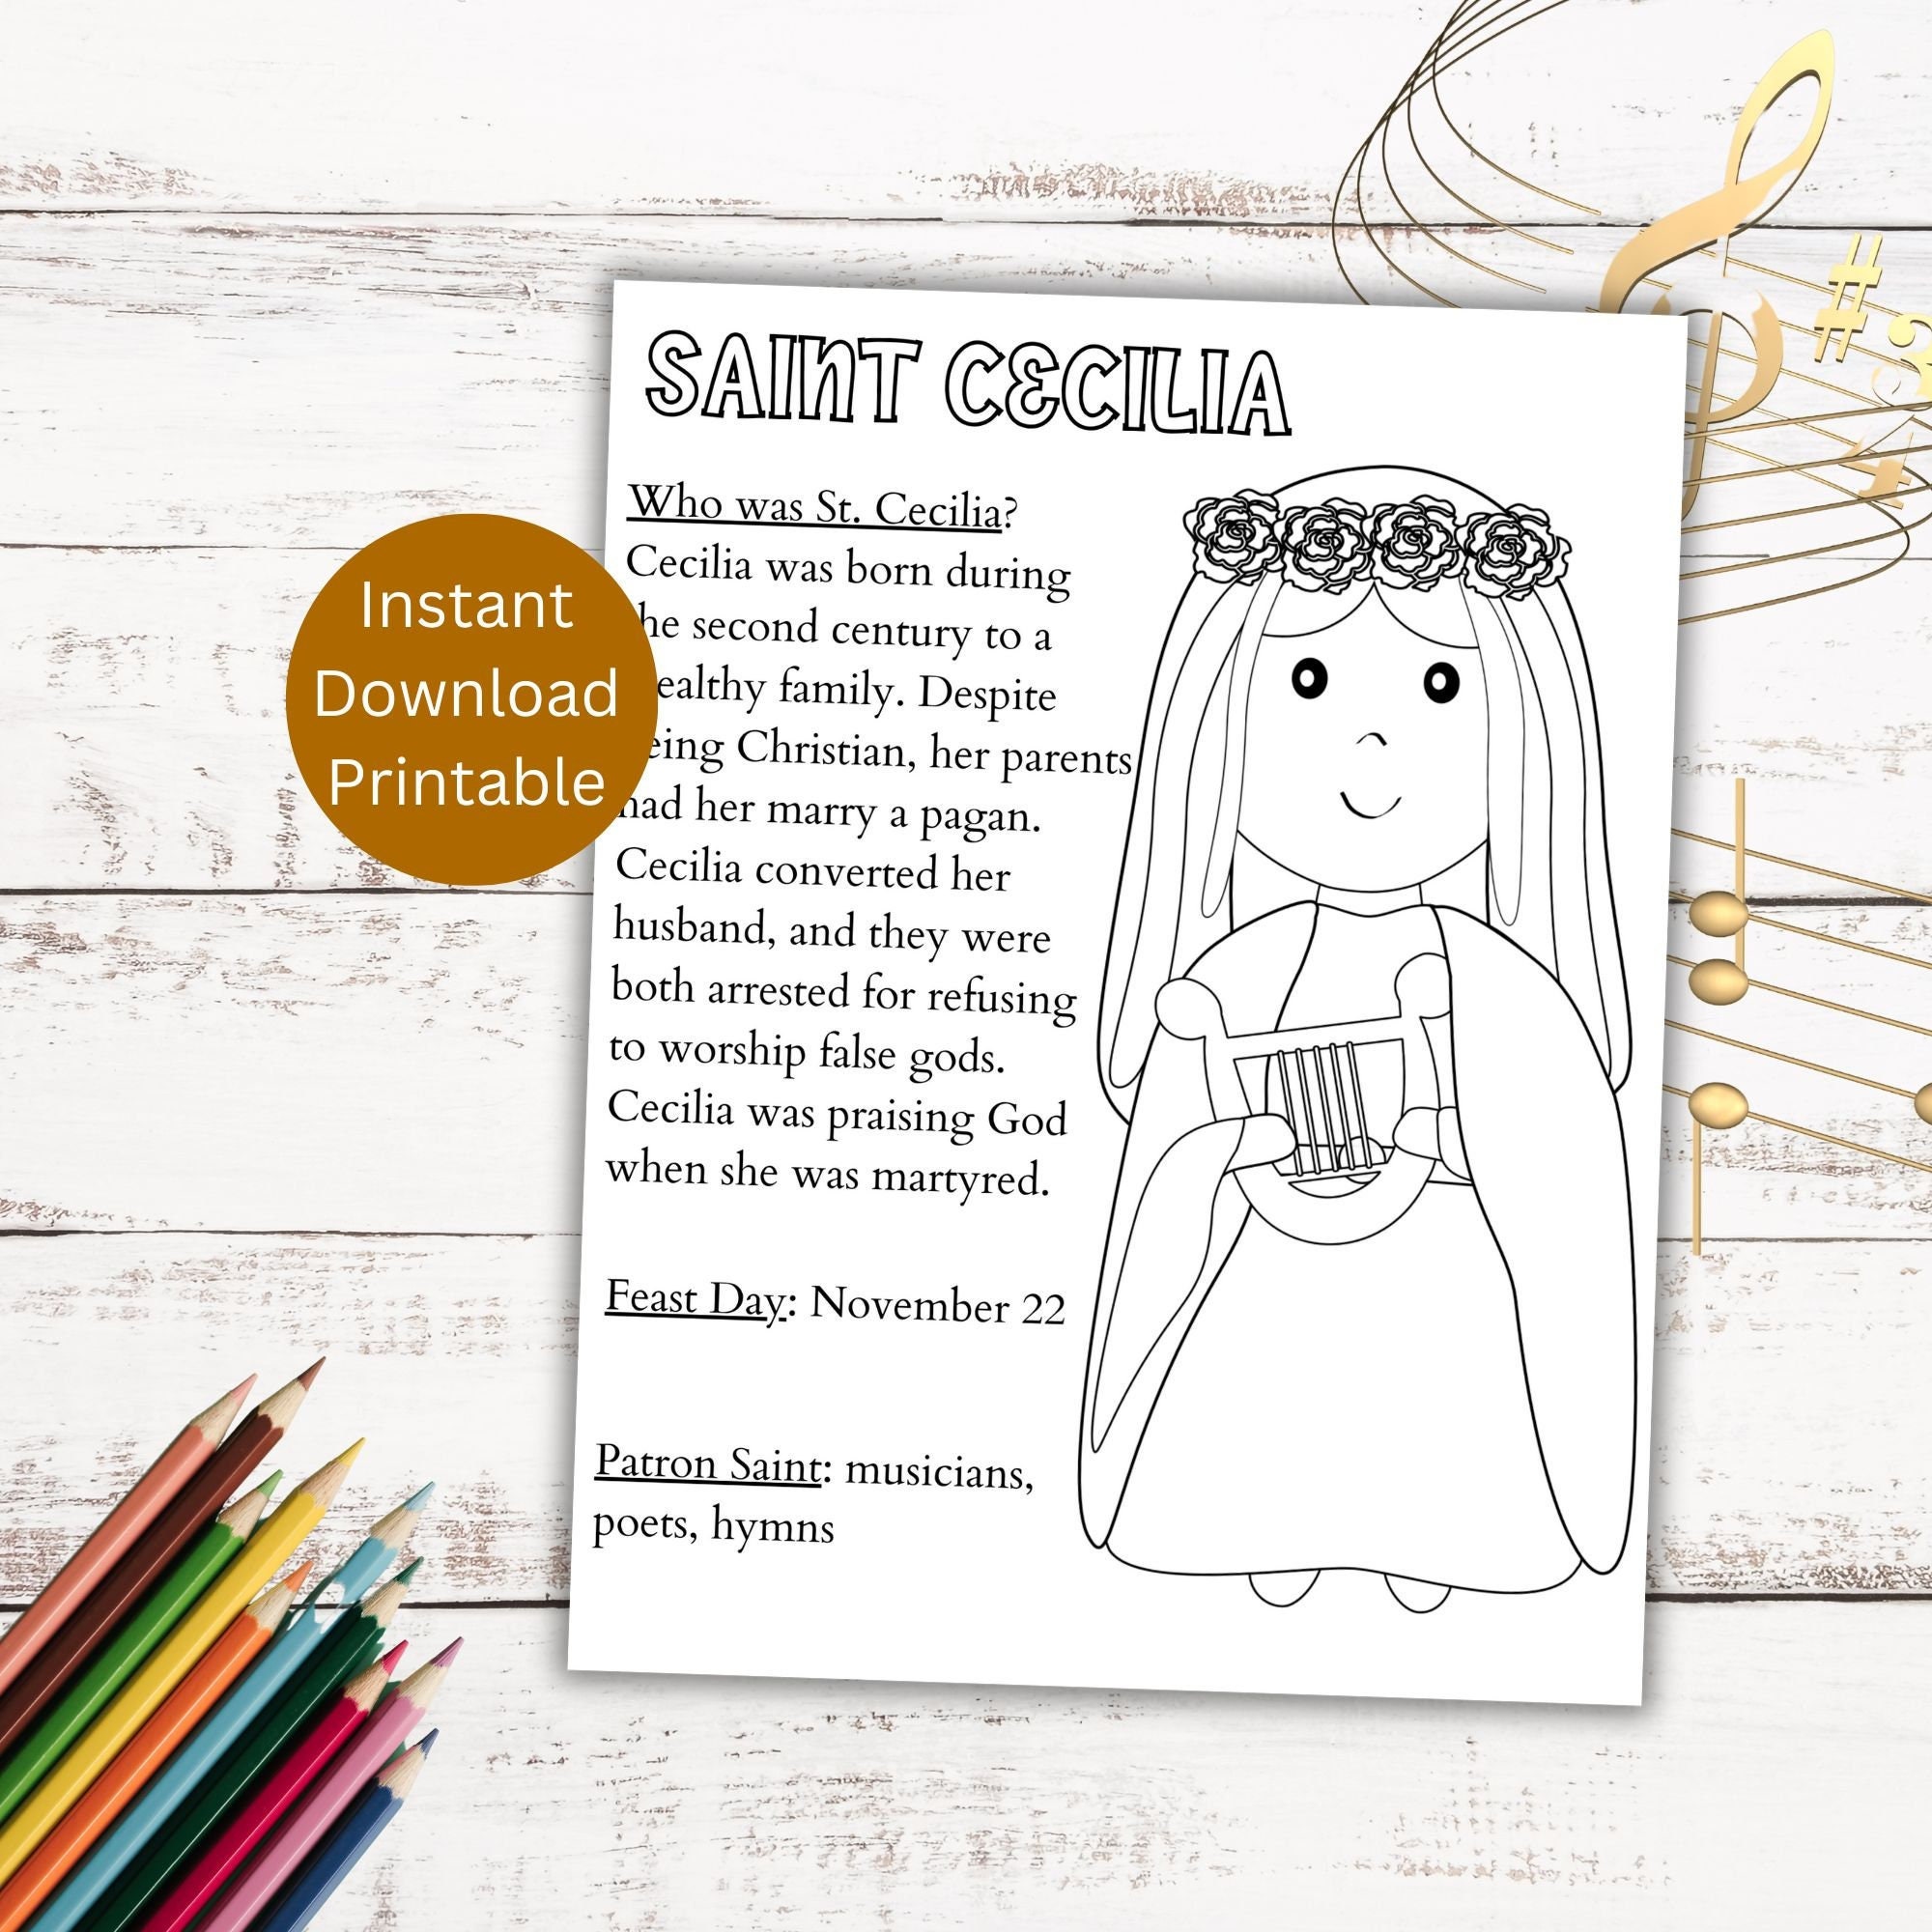 St cecilia coloring page printable coloring page saint coloring page catholic coloring page download now